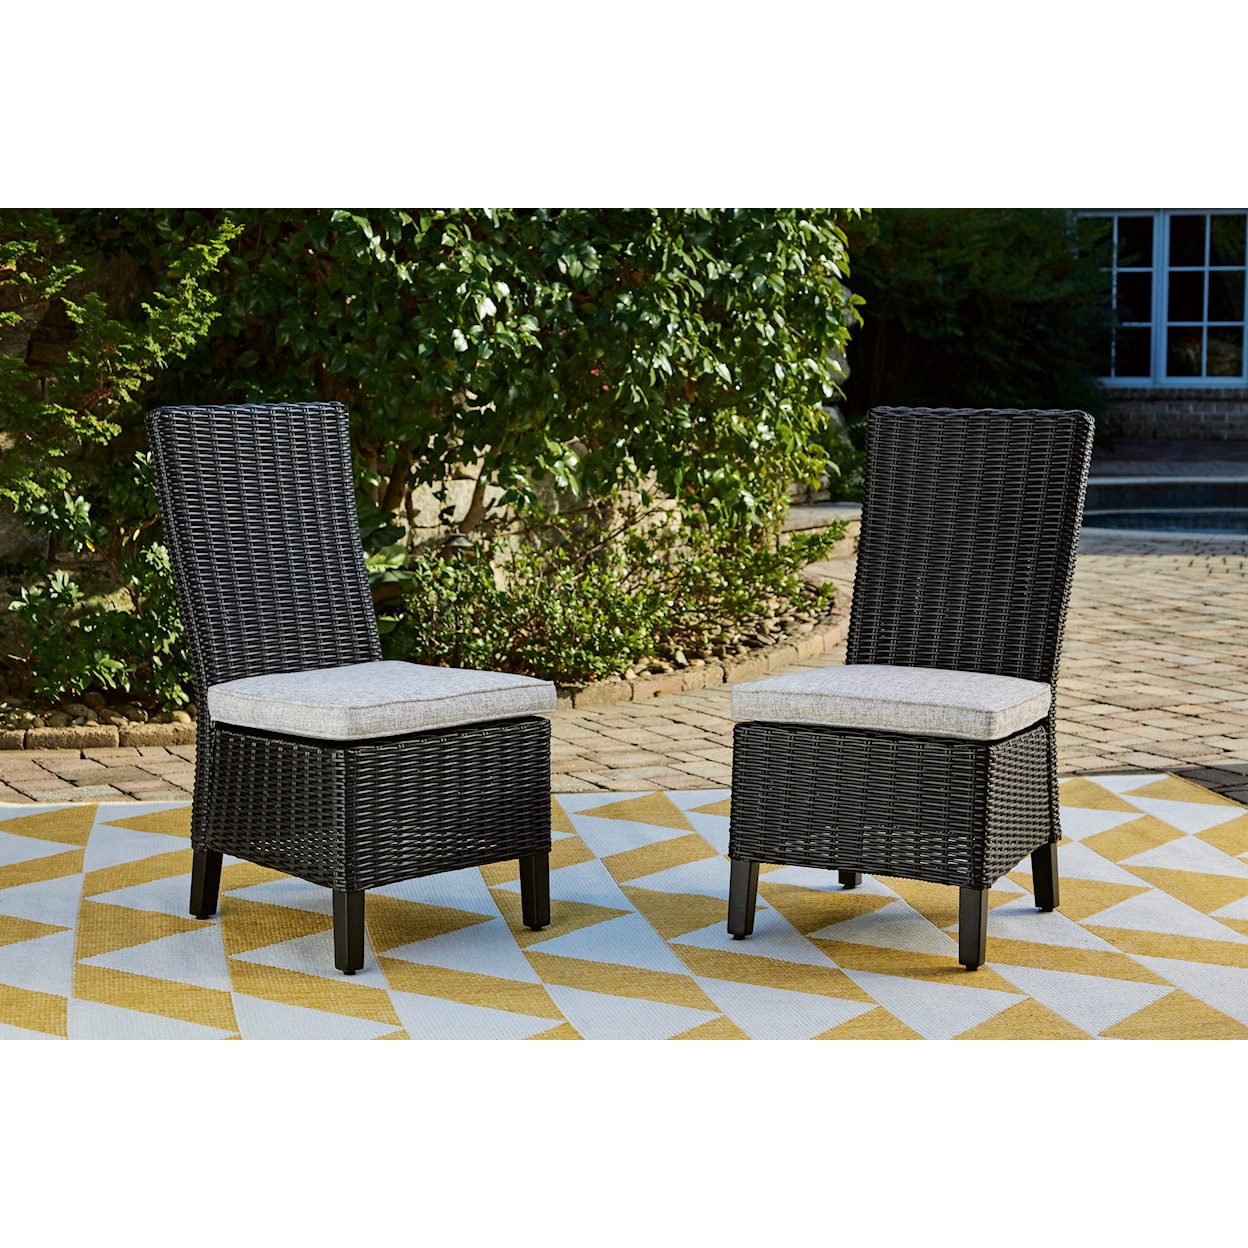 Ashley Furniture Signature Design Beachcroft Set of 2 Side Chairs with Cushion